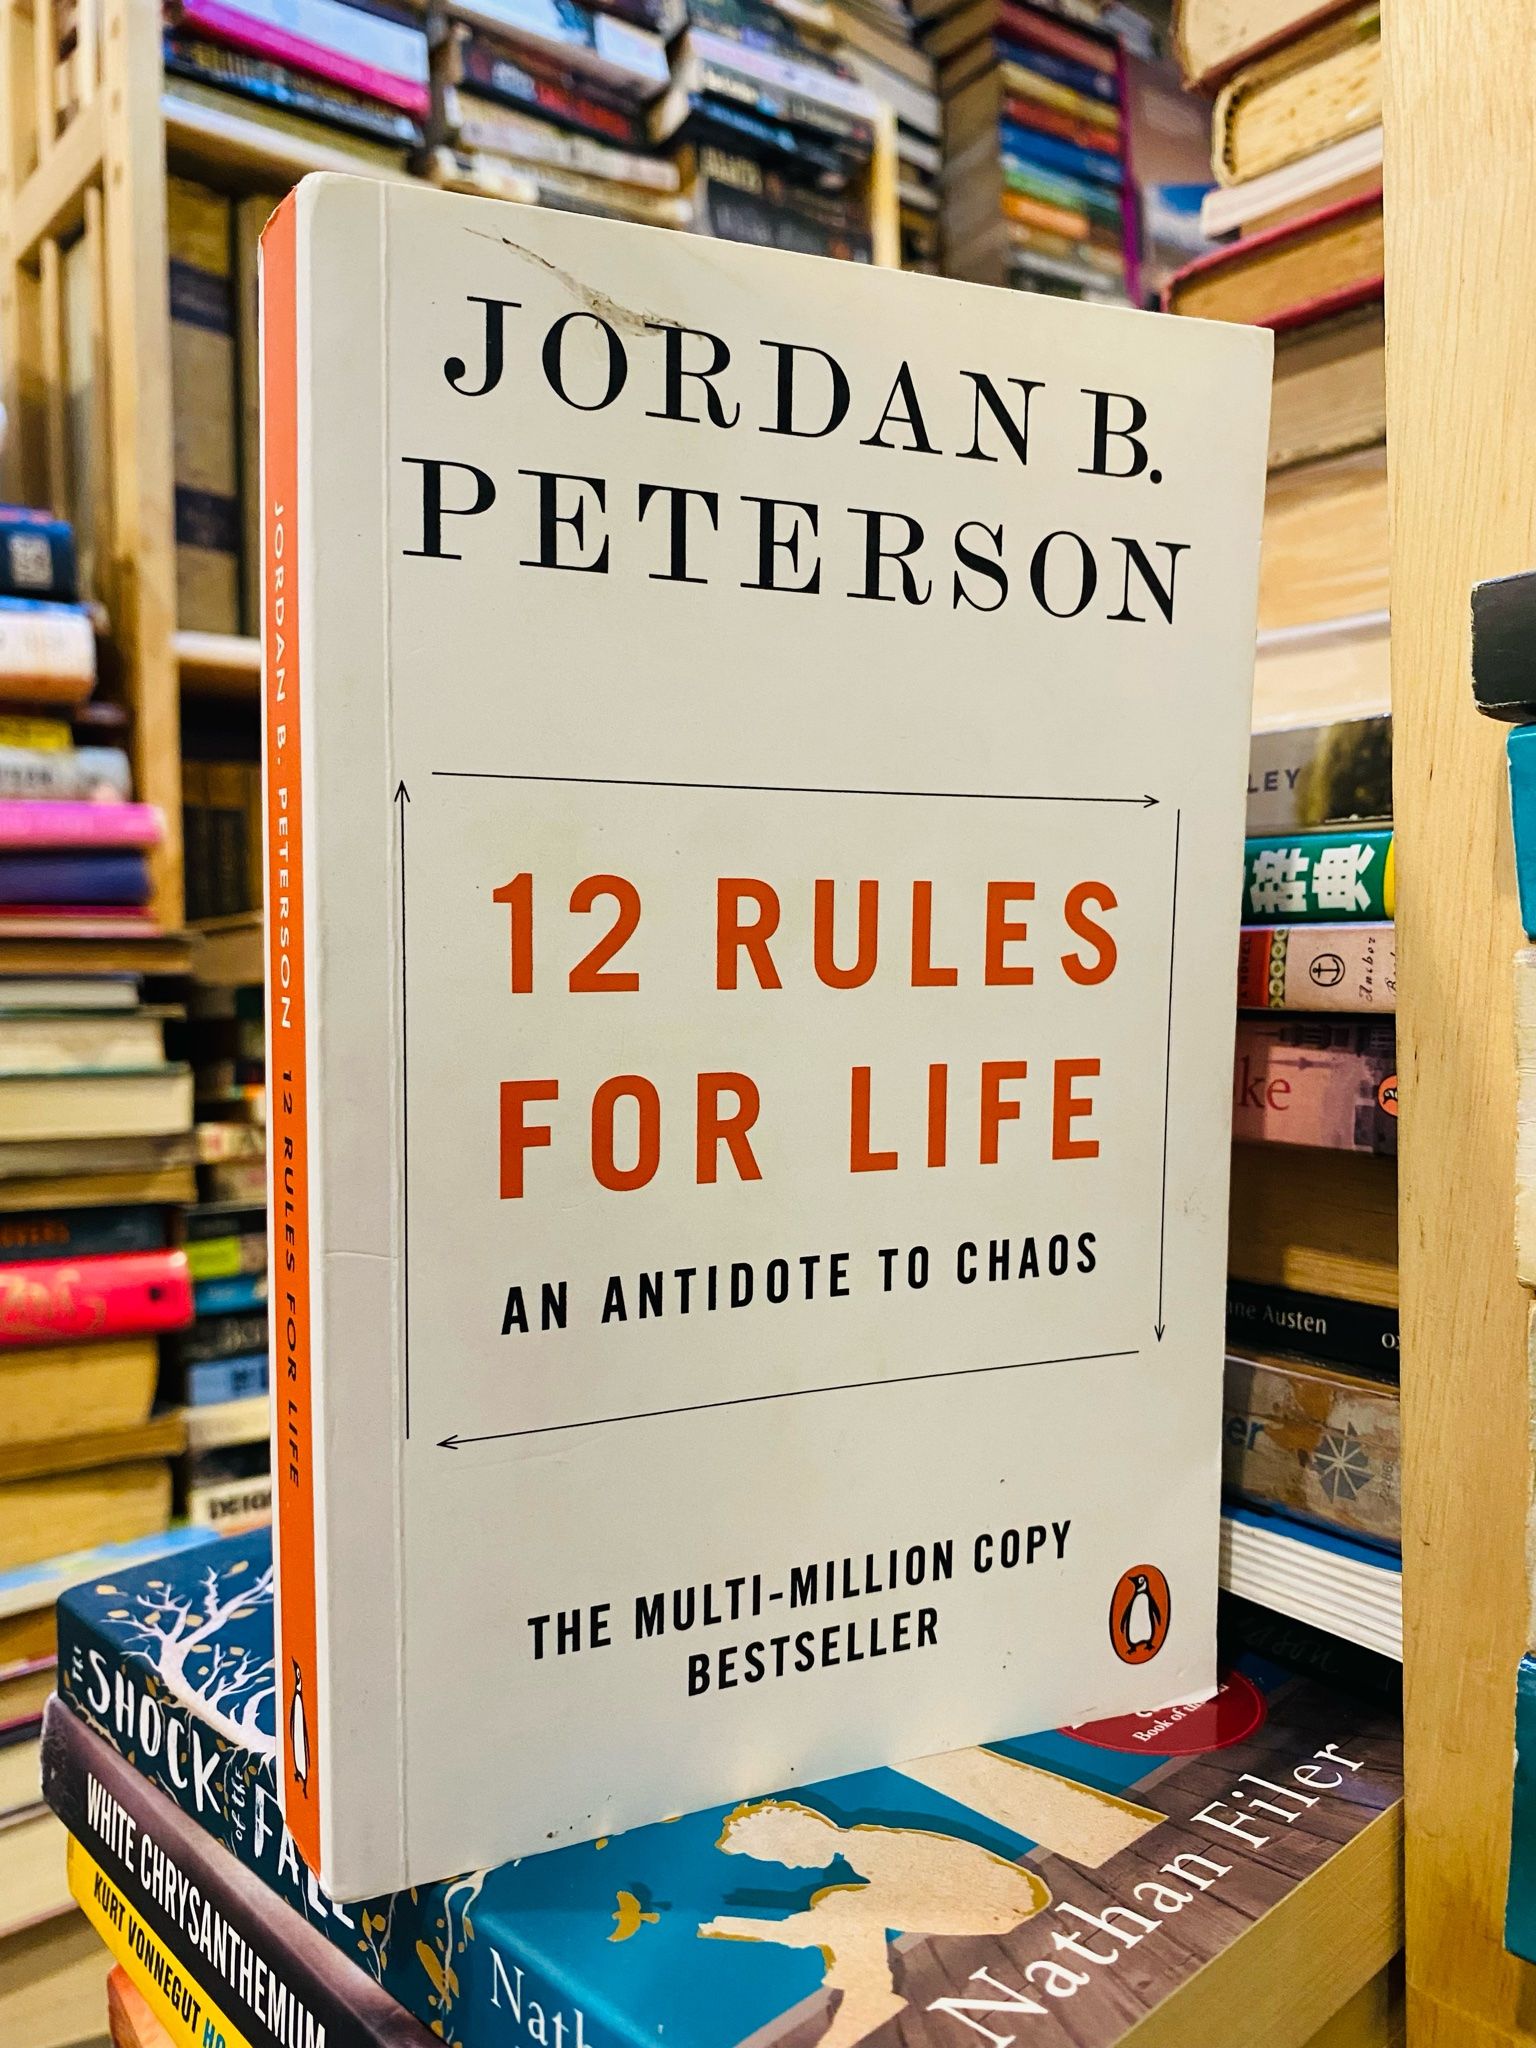  12 RULES FOR LIFE: AN ANTIDOTE TO CHAOS - JORDAN B. PETERSON 